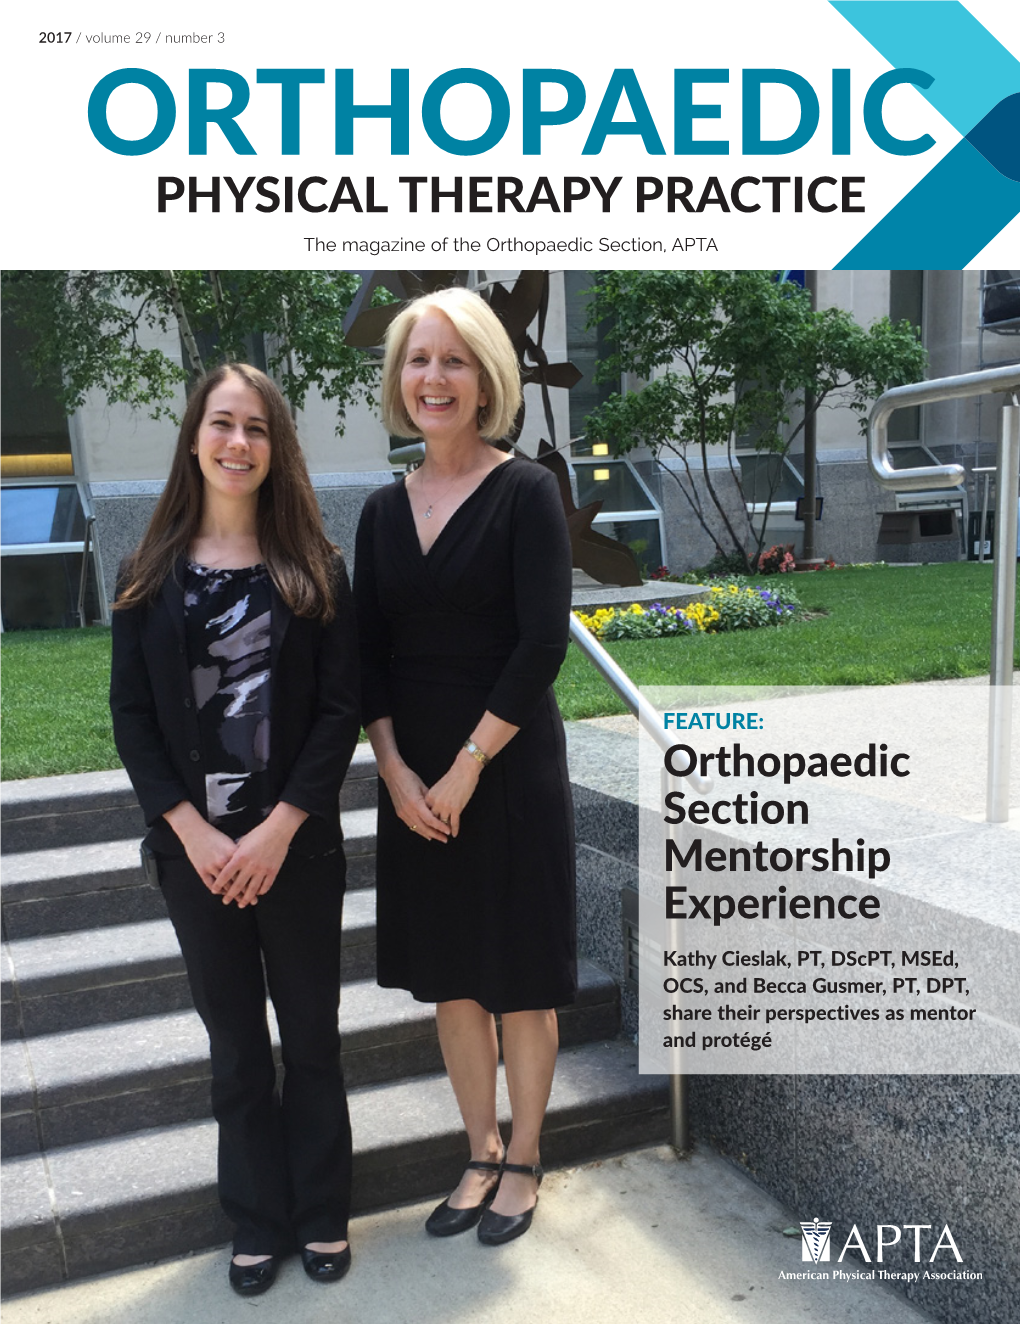 PHYSICAL THERAPY PRACTICE the Magazine of the Orthopaedic Section, APTA